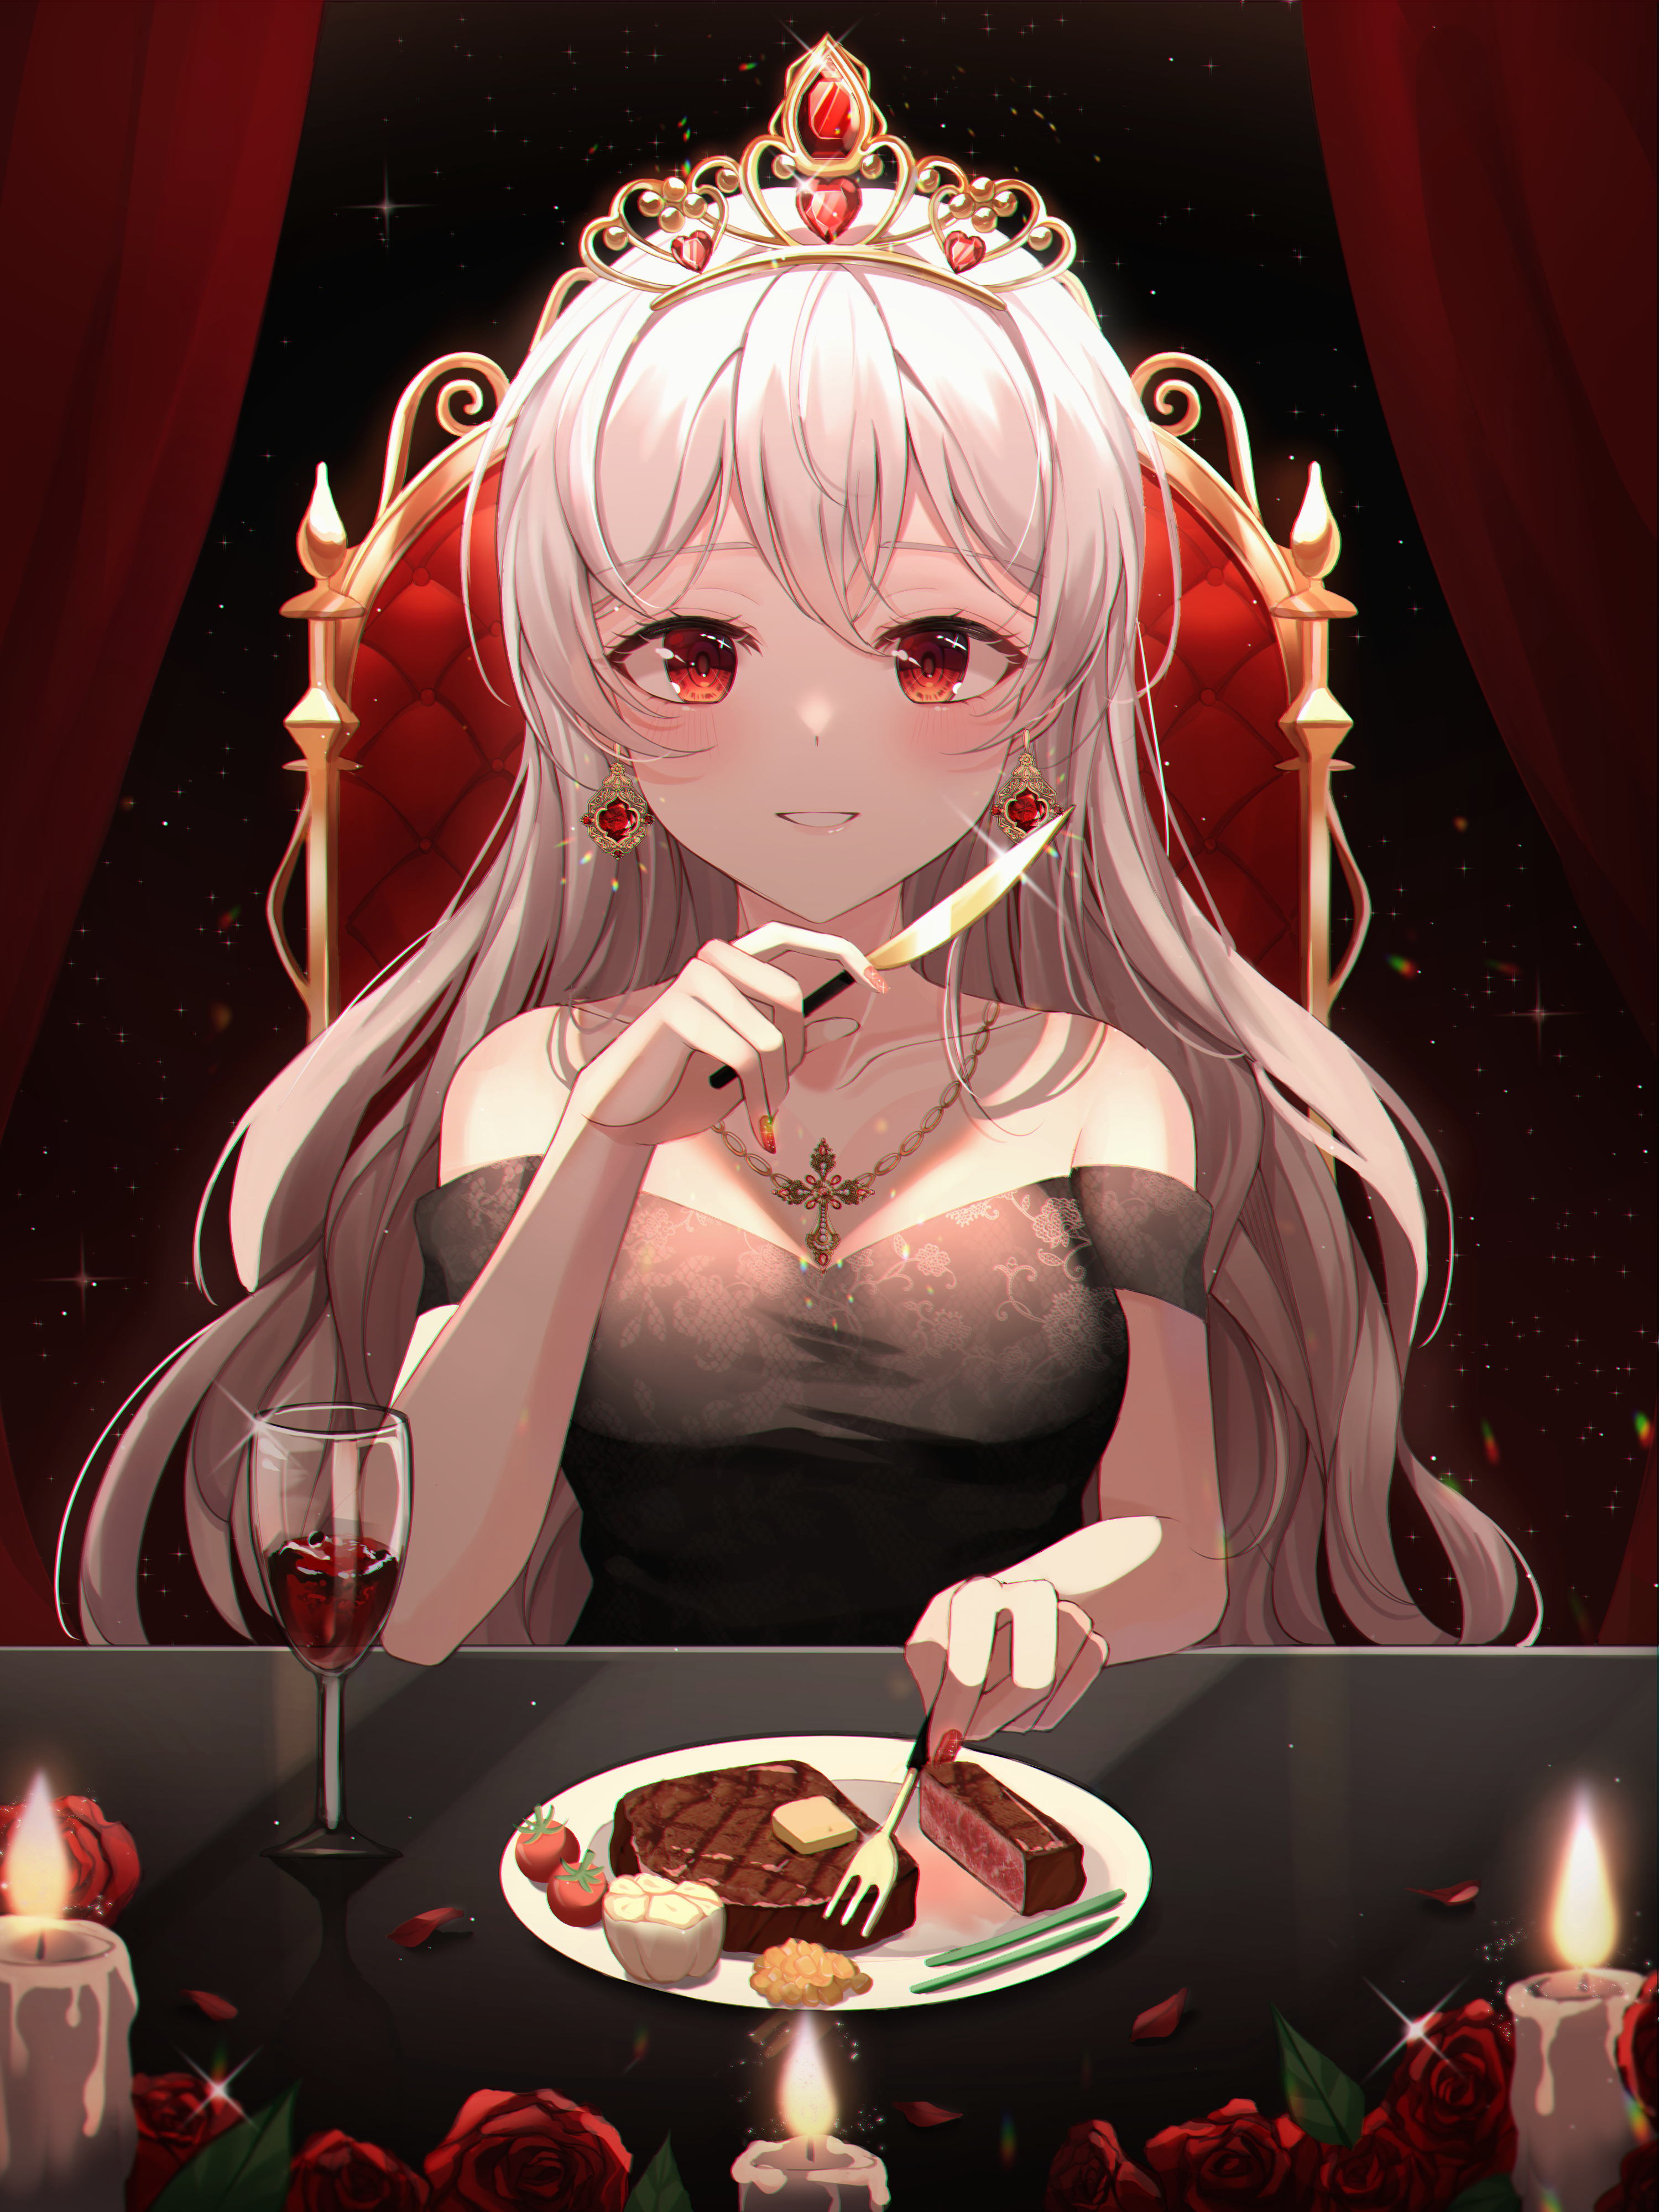 Anime 3000x4000 anime anime girls red eyes food eating knife fork tiaras earring white hair candles rose flowers petals necklace